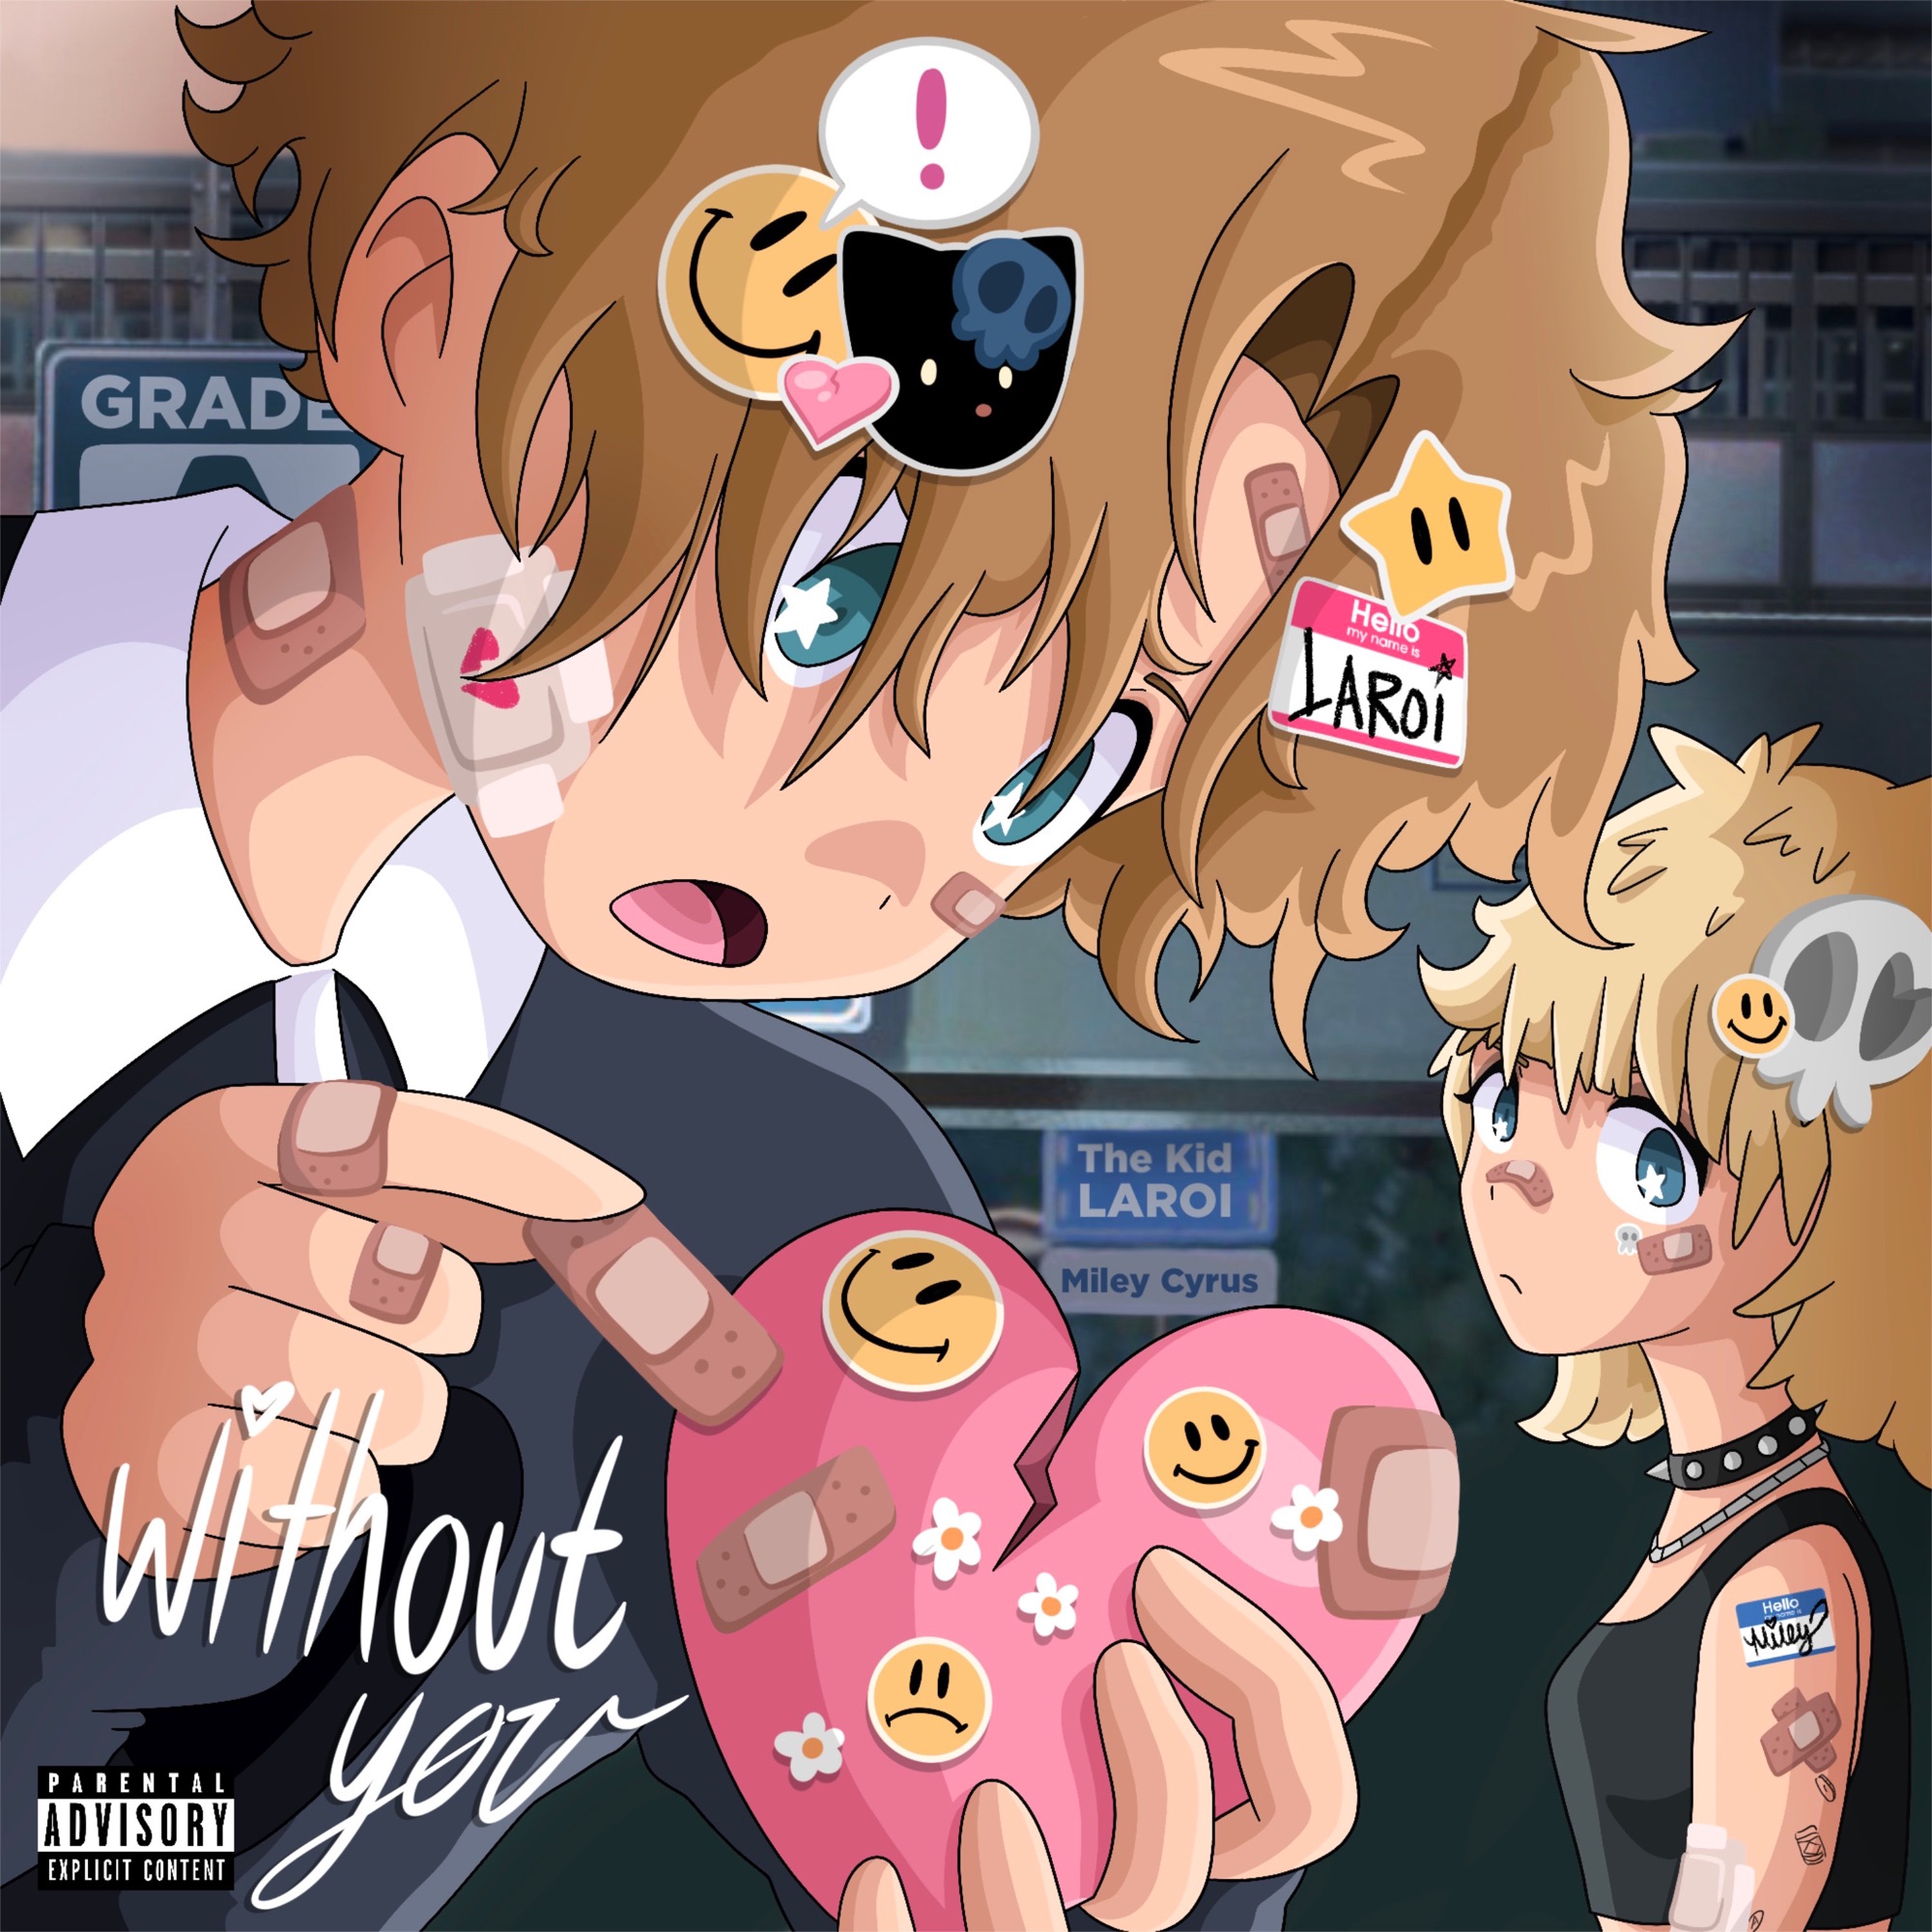 The Kid LAROI & Miley Cyrus - WITHOUT YOU (Miley Cyrus Remix) - Single